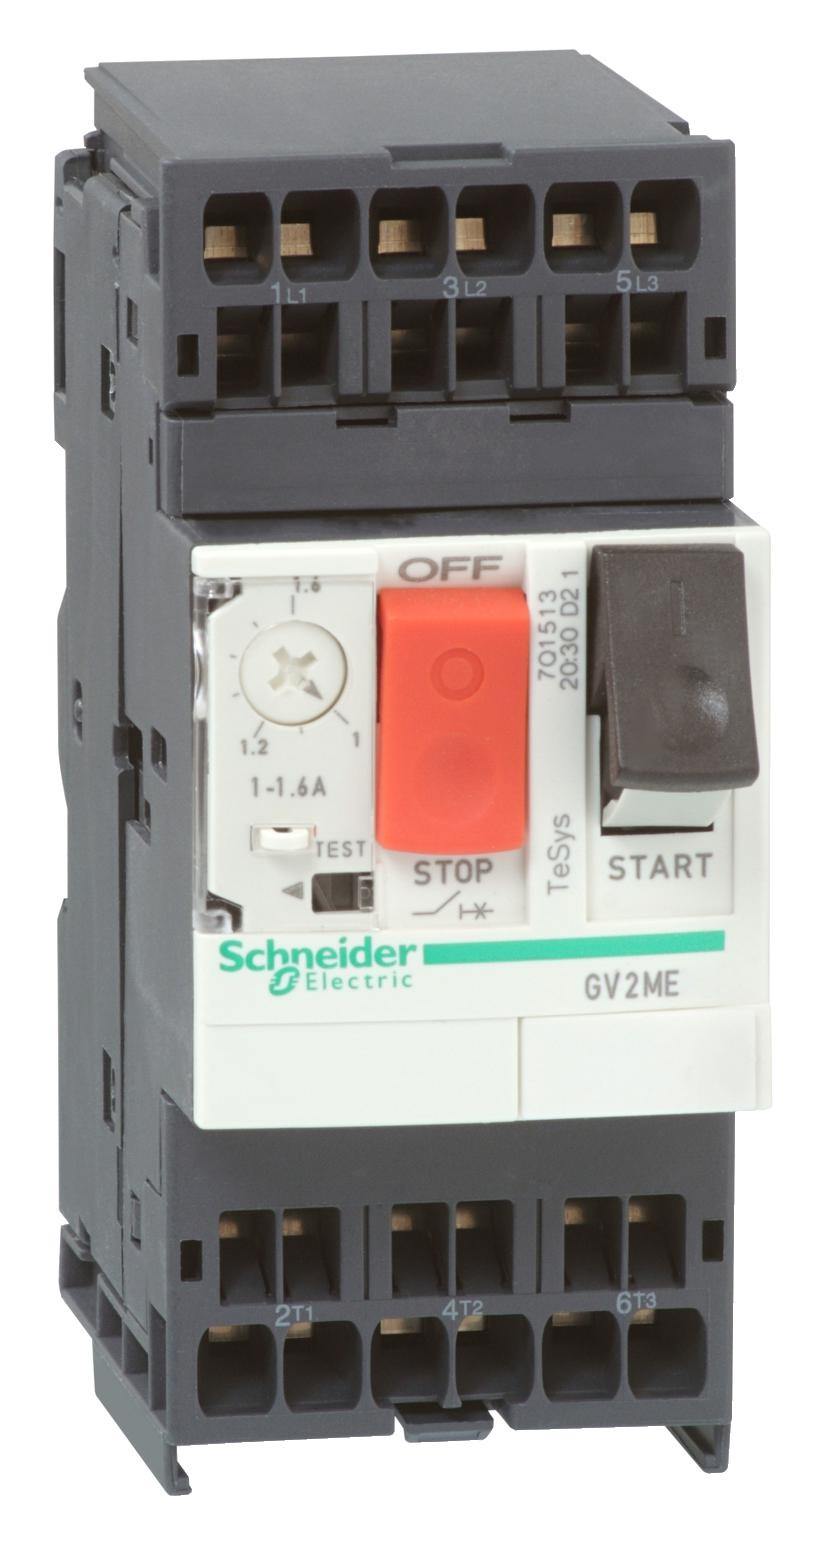 GV2ME043 THERMAL MAGNETIC CIRCUIT BREAKER SCHNEIDER ELECTRIC